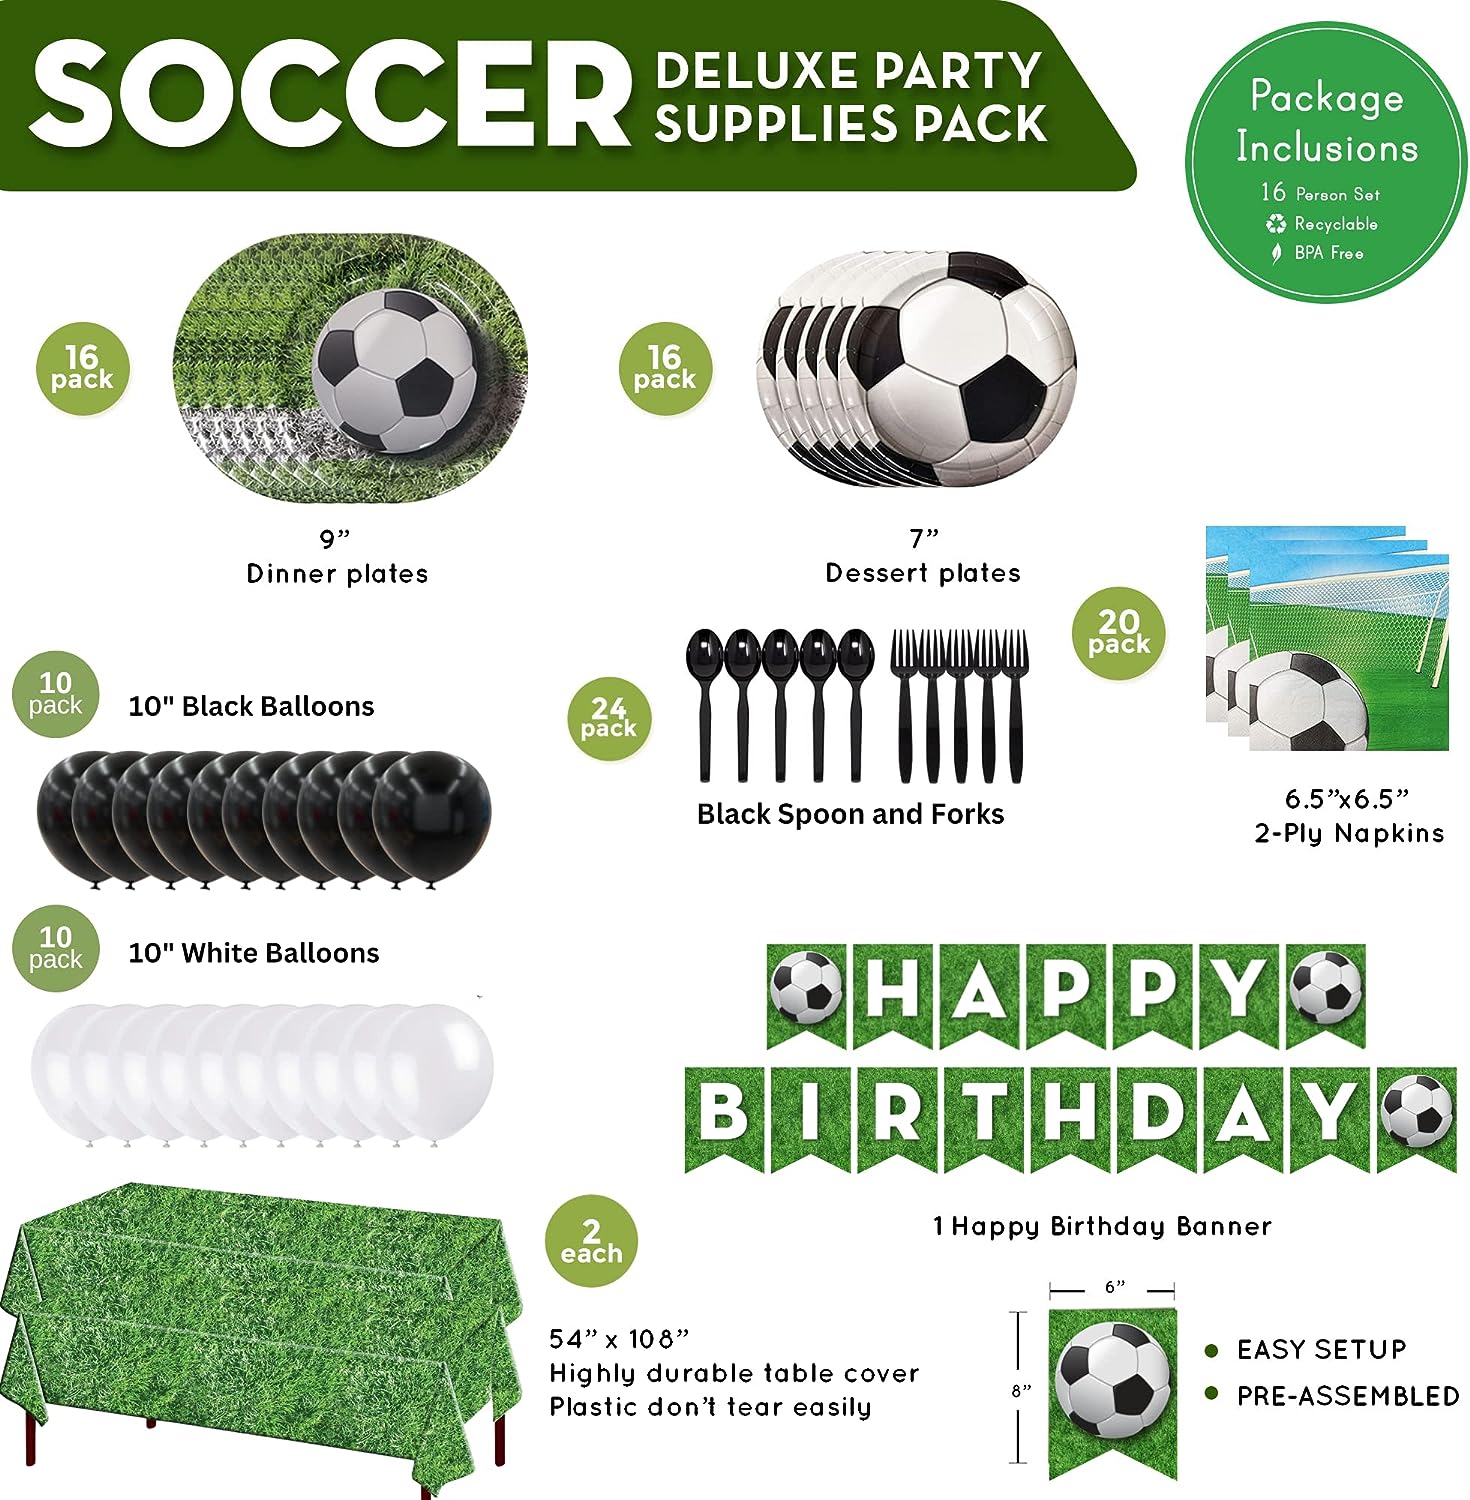 These fun Soccer Deluxe Party Supplies Packs 16 Soccer Dinner Plates, 16 Soccer Dessert Plates, 20 Soccer Lunch Napkins, 2 Grass Table Covers, 1 Soccer Banner, 10 White Balloons, 10 Black Balloons, Plastic Forks, and Plastic Spoons.